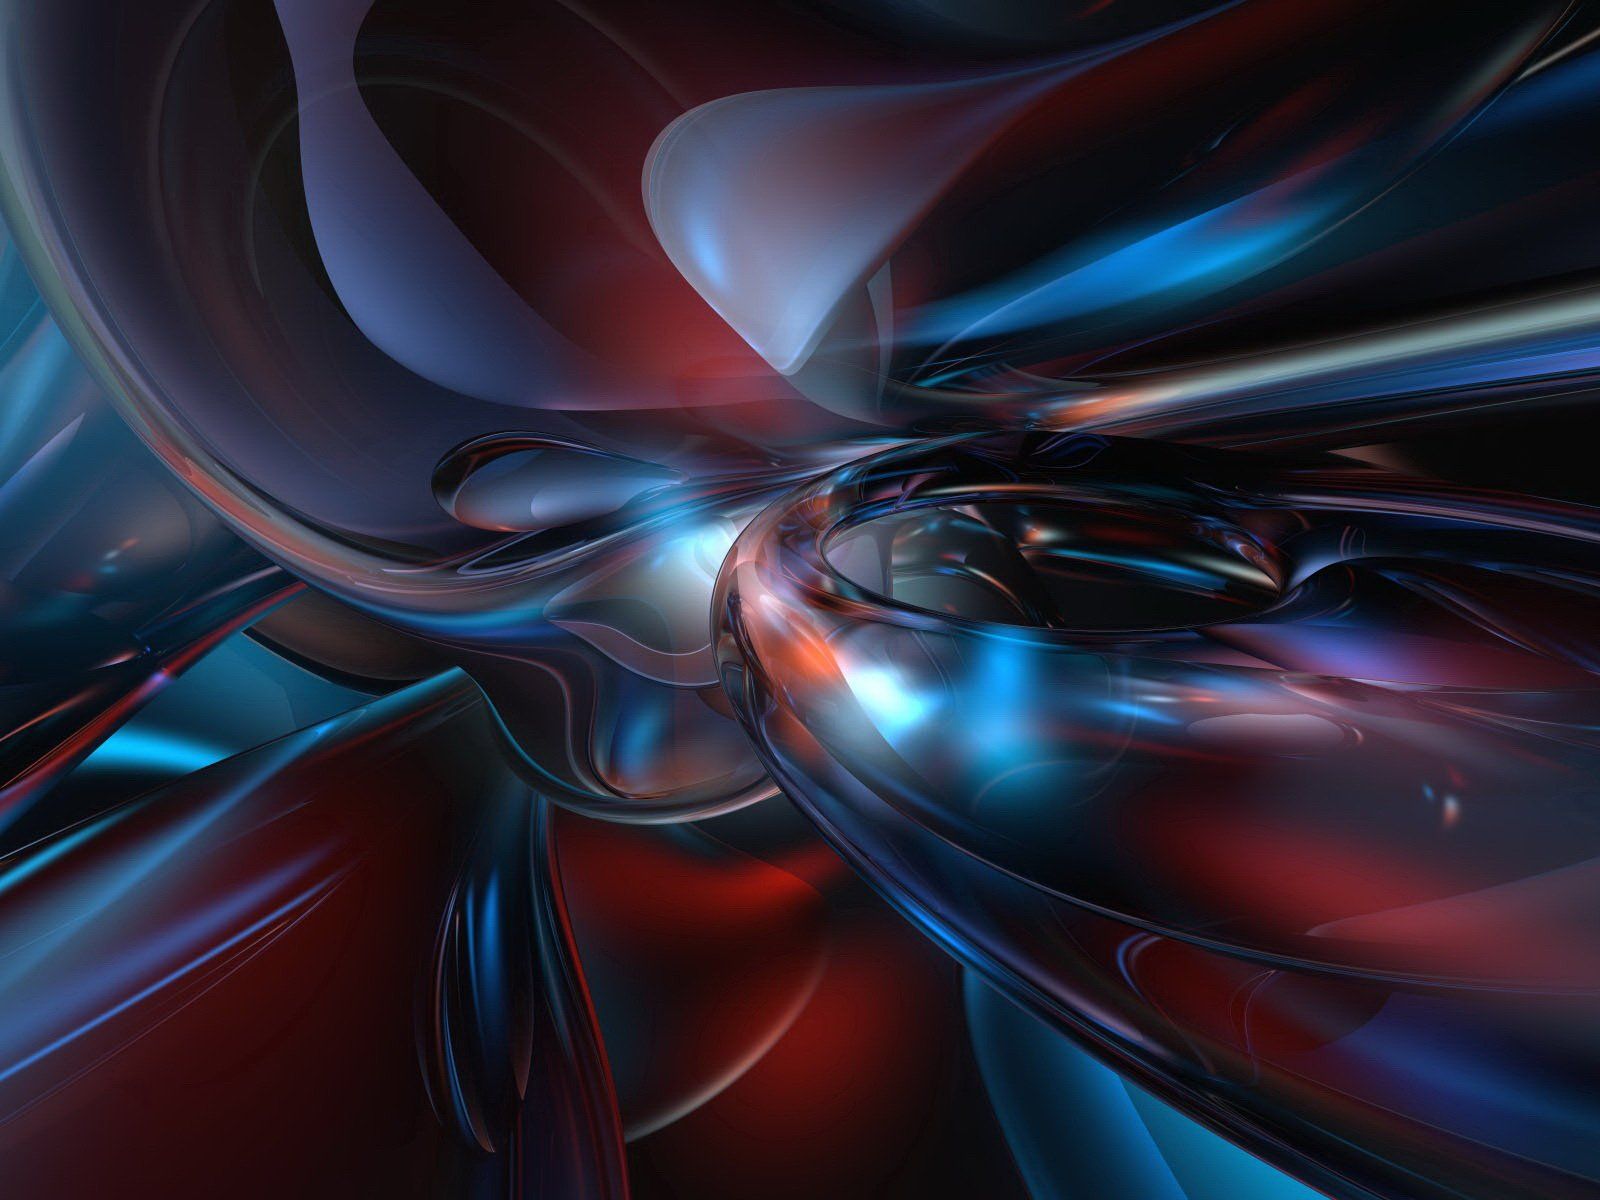 Abstract 3D Graphic Wallpaper